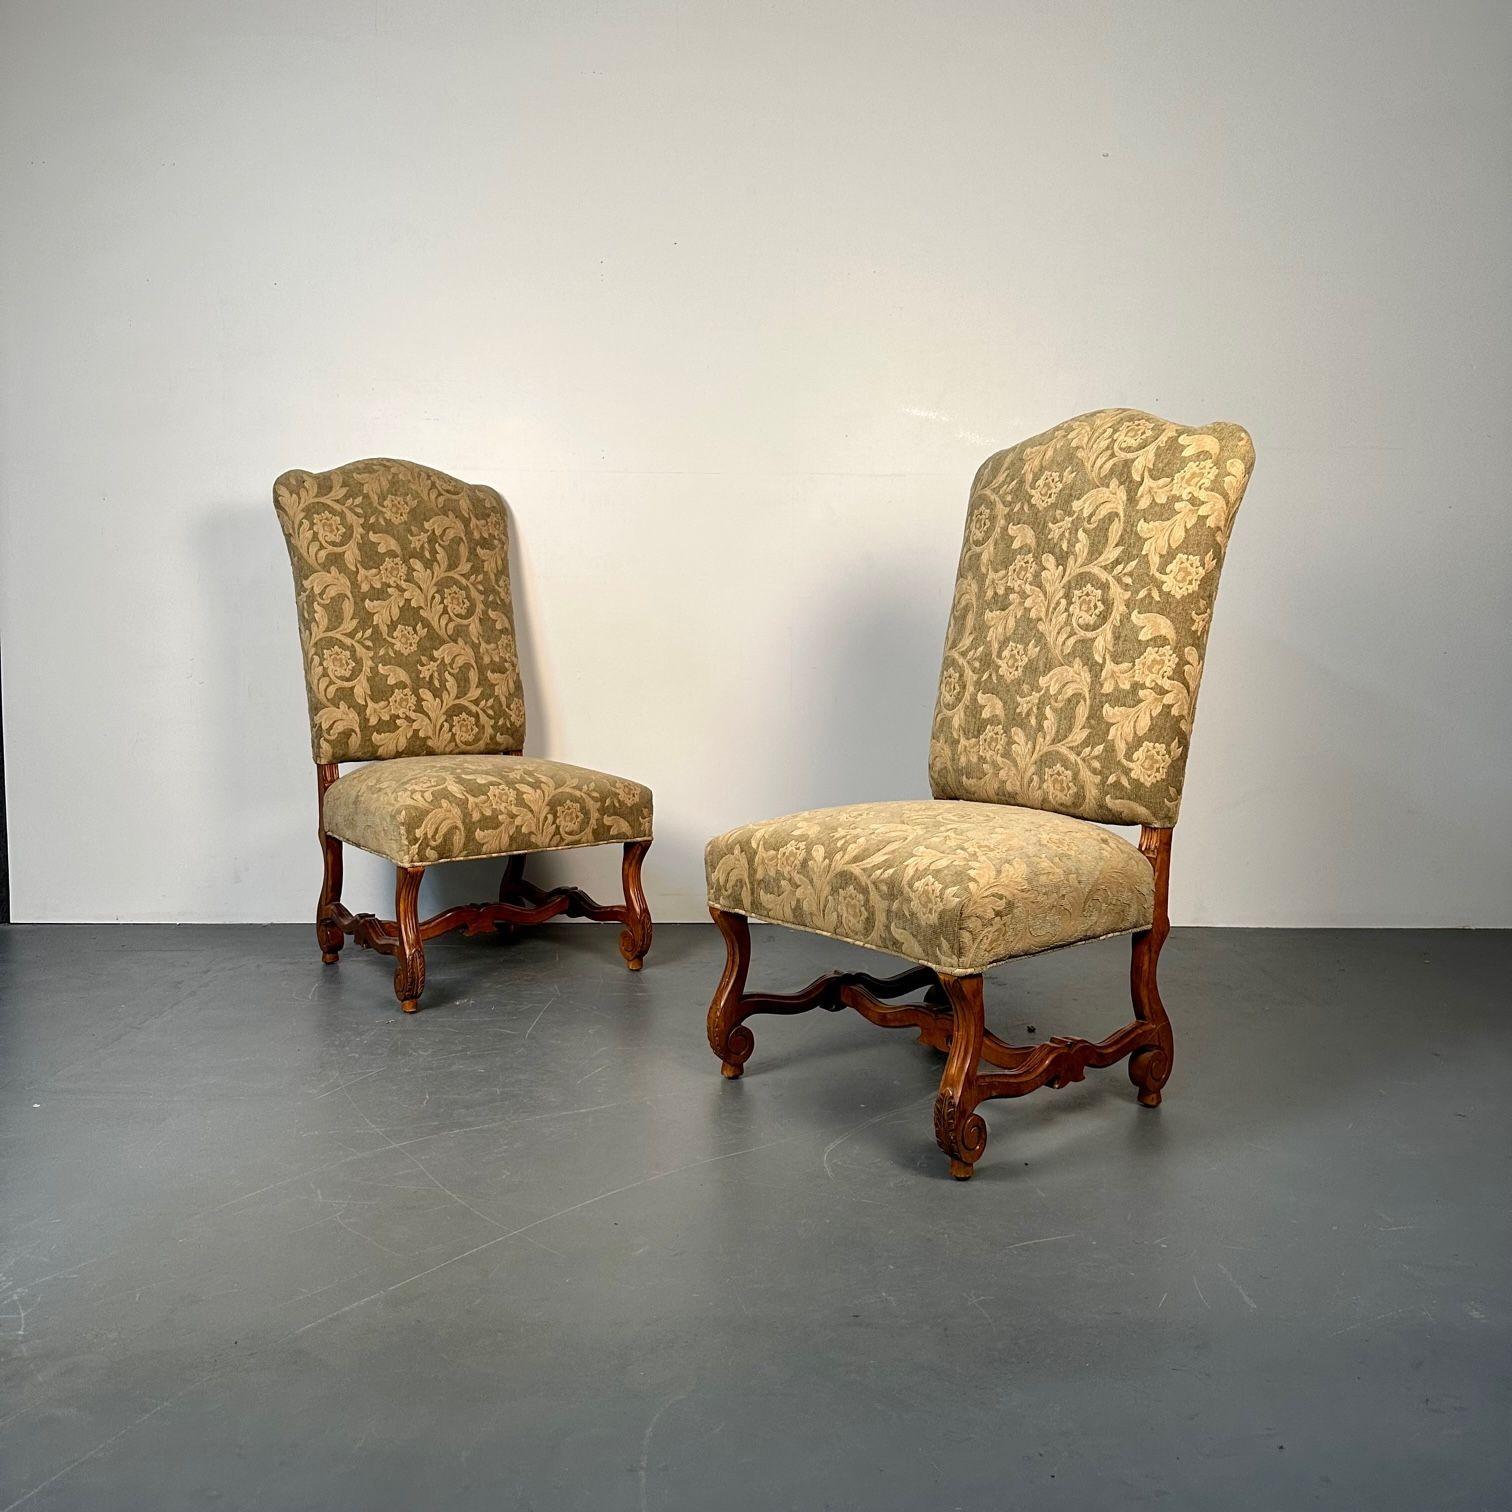 Pair of Jacobean Throne Chairs, King and Queen, Fine Fabric
 
A fine pair of wonderfully upholstered Throne chairs in the Jacobean fashion.  Fauteuils each with an arched back and padded seat joined to open sides and raised on turned legs joined by